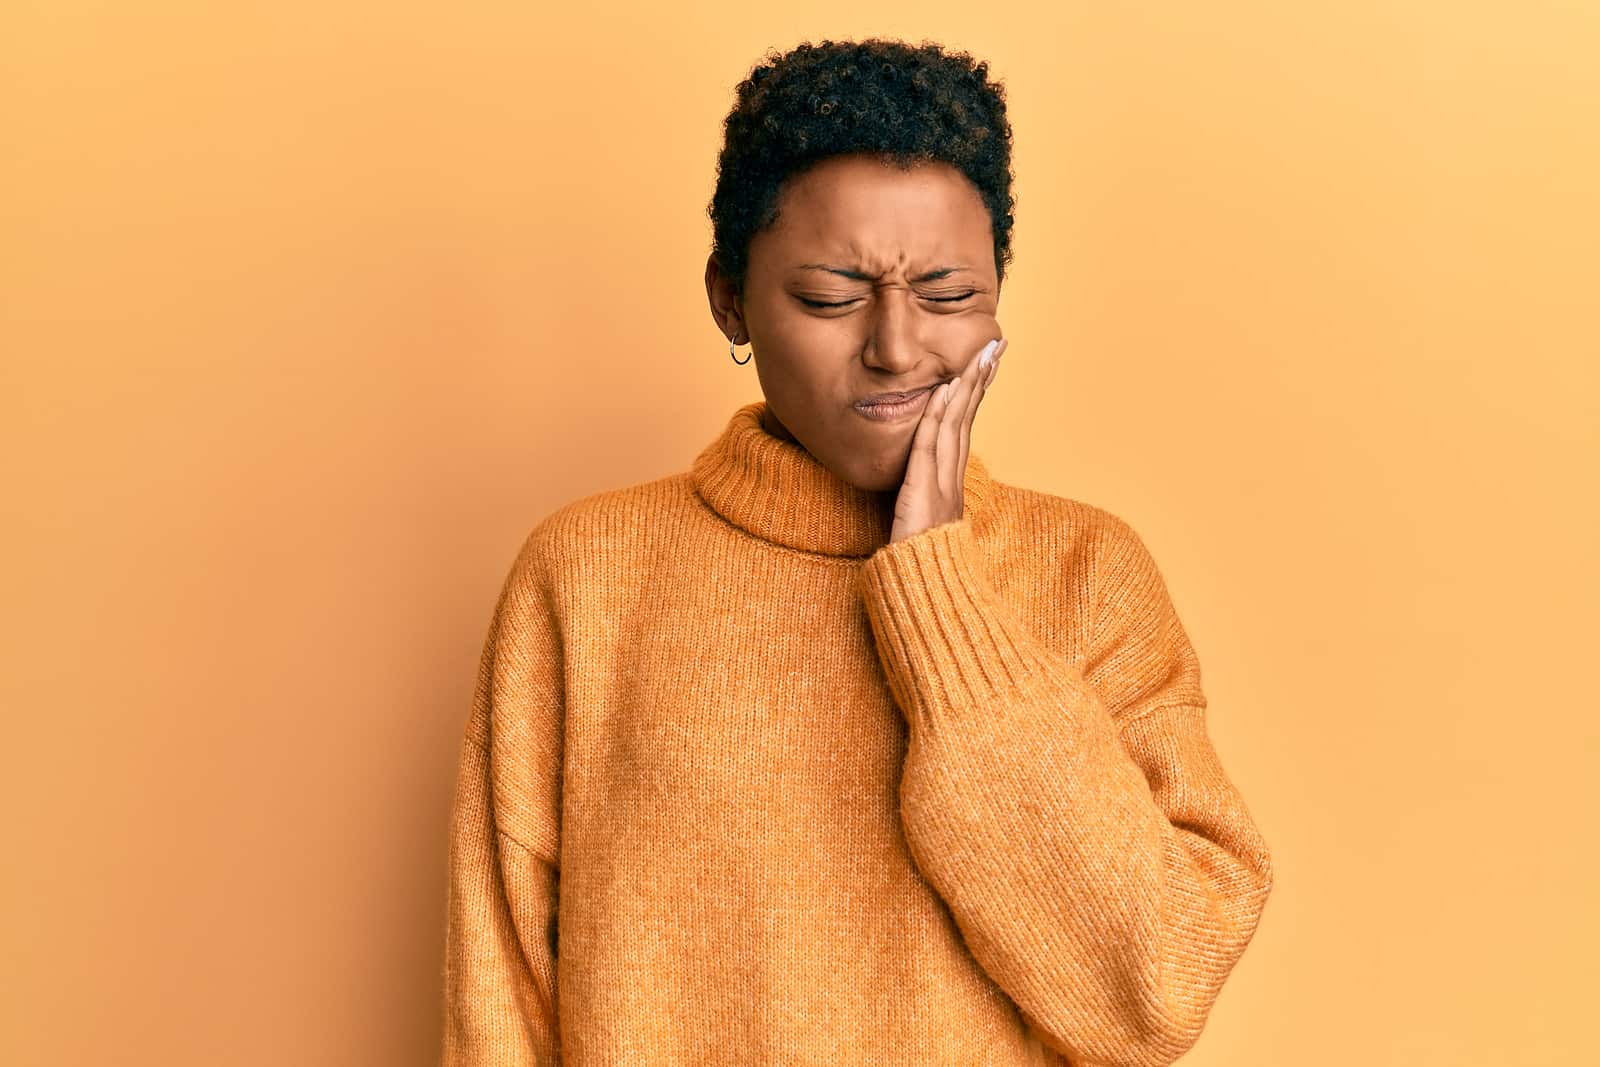 African American woman with toothache against orange background.